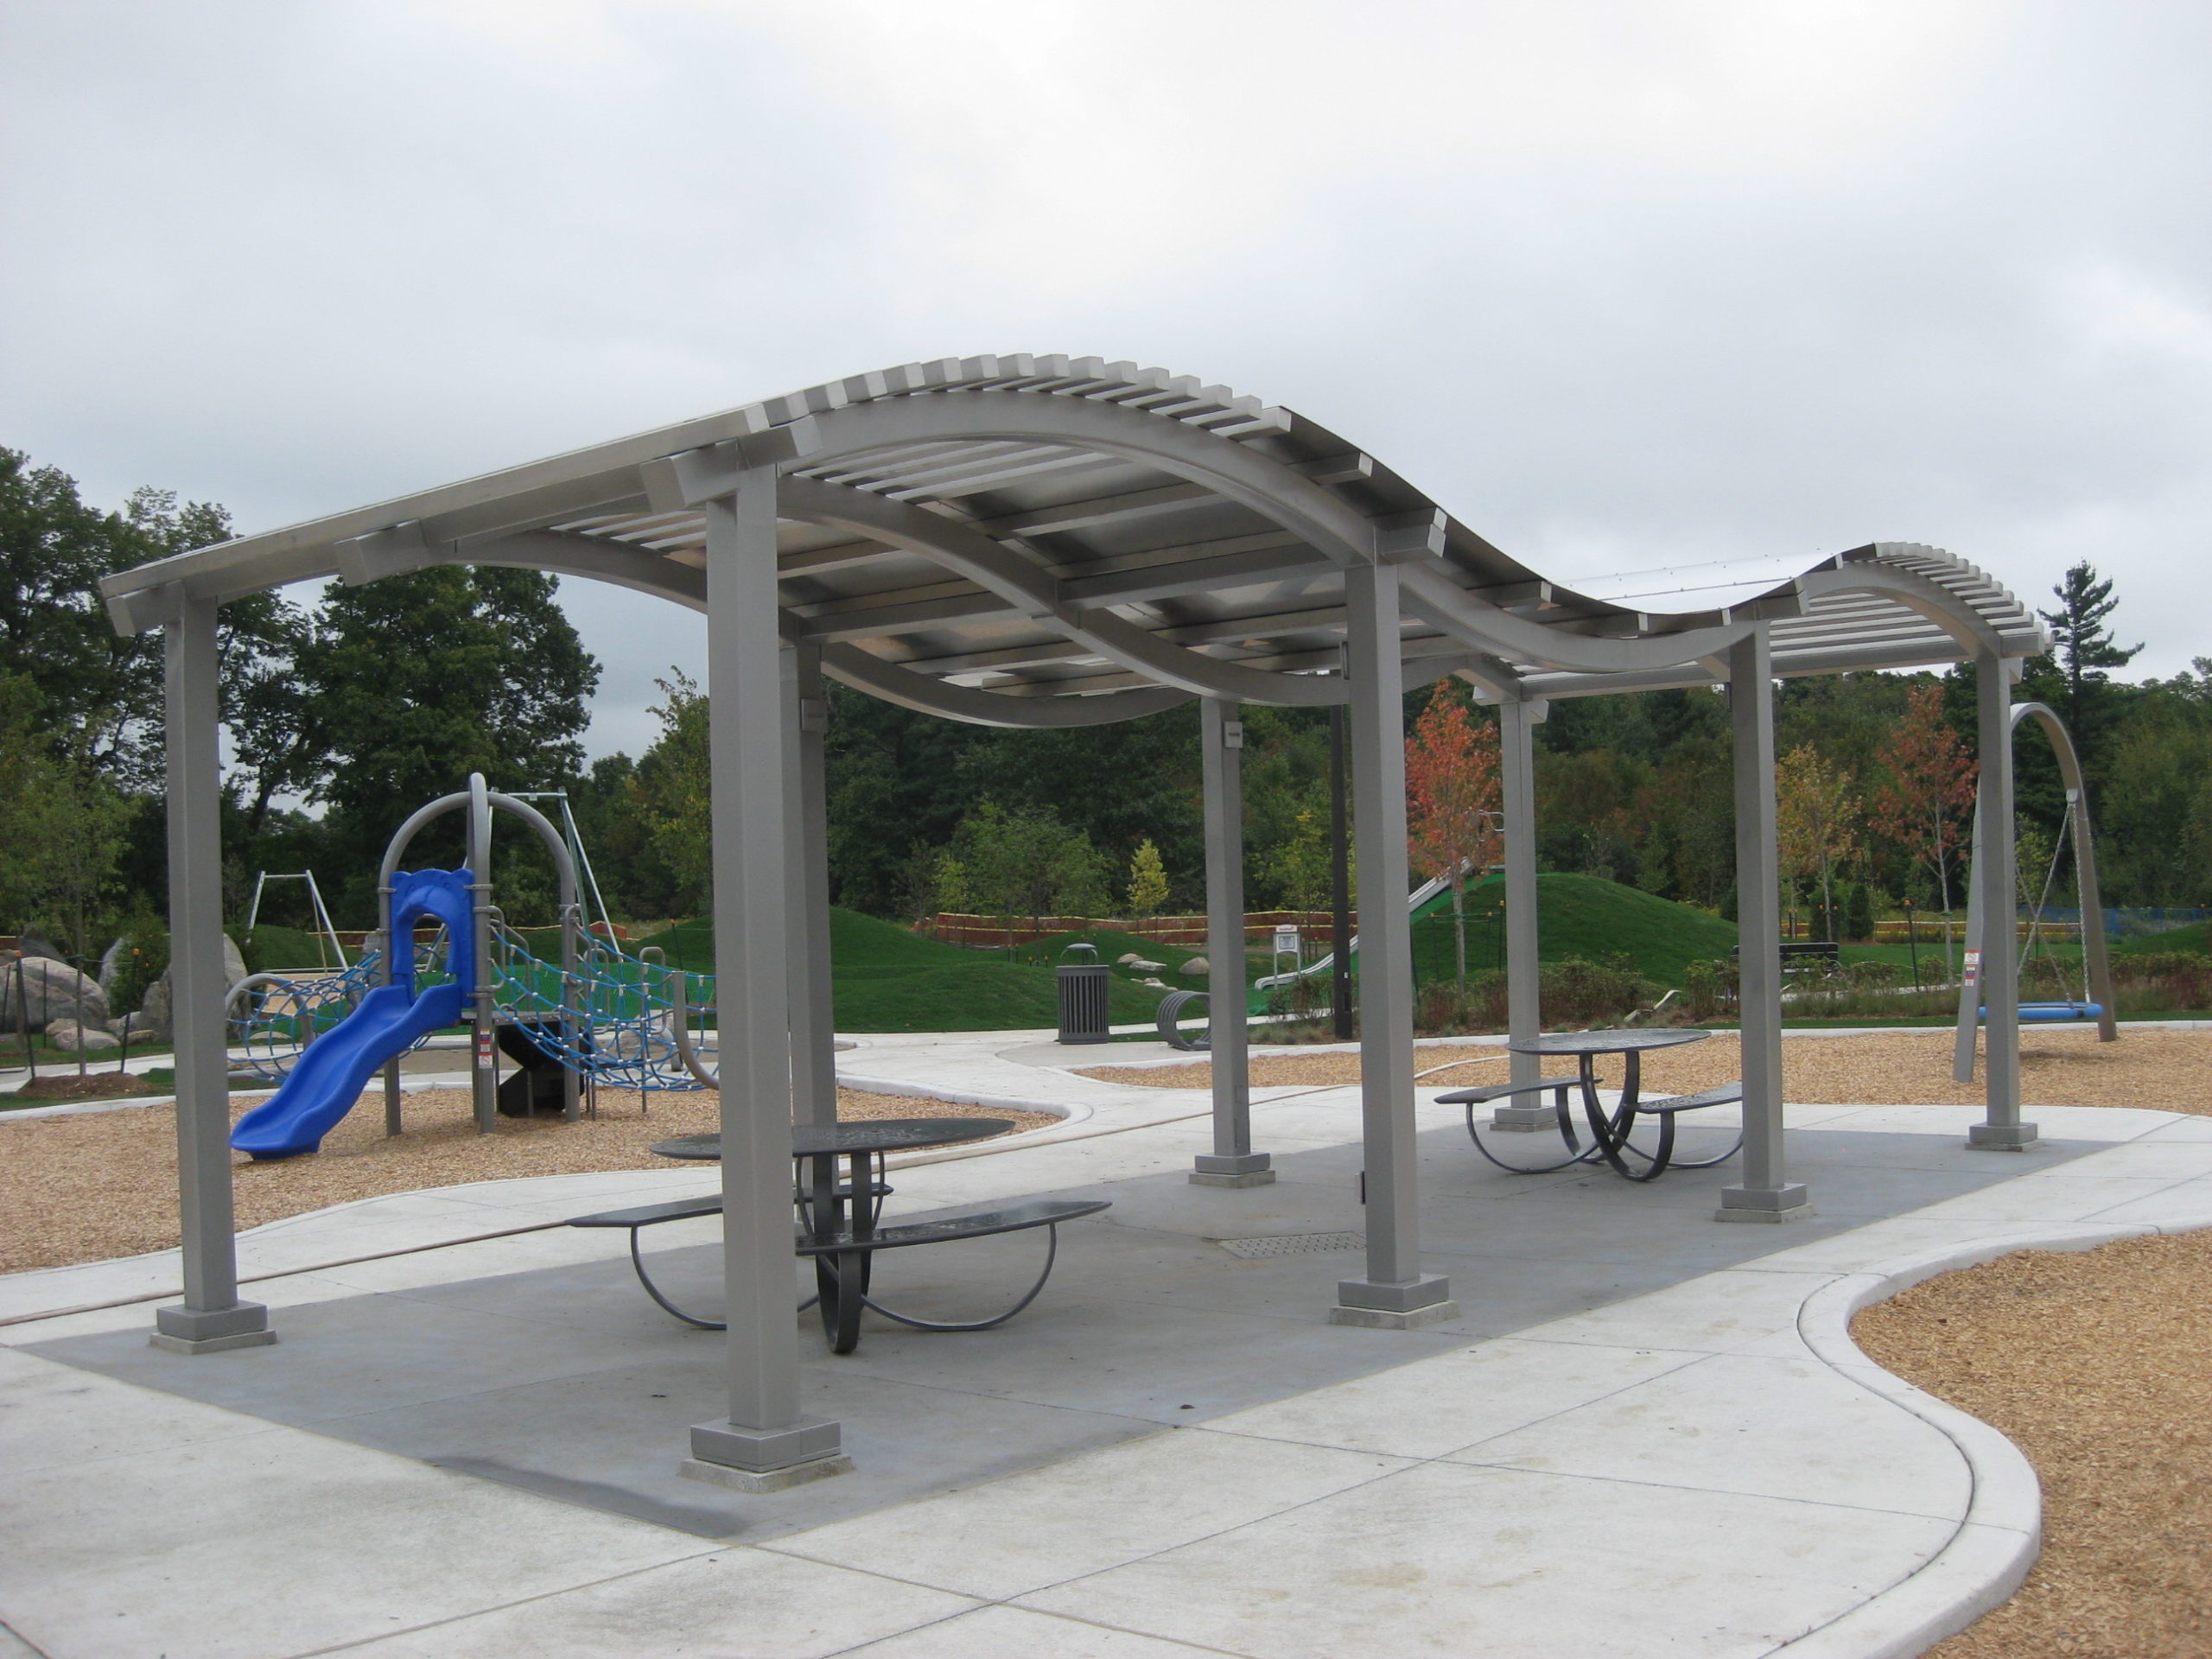 Shade structure with picnic benches under it.